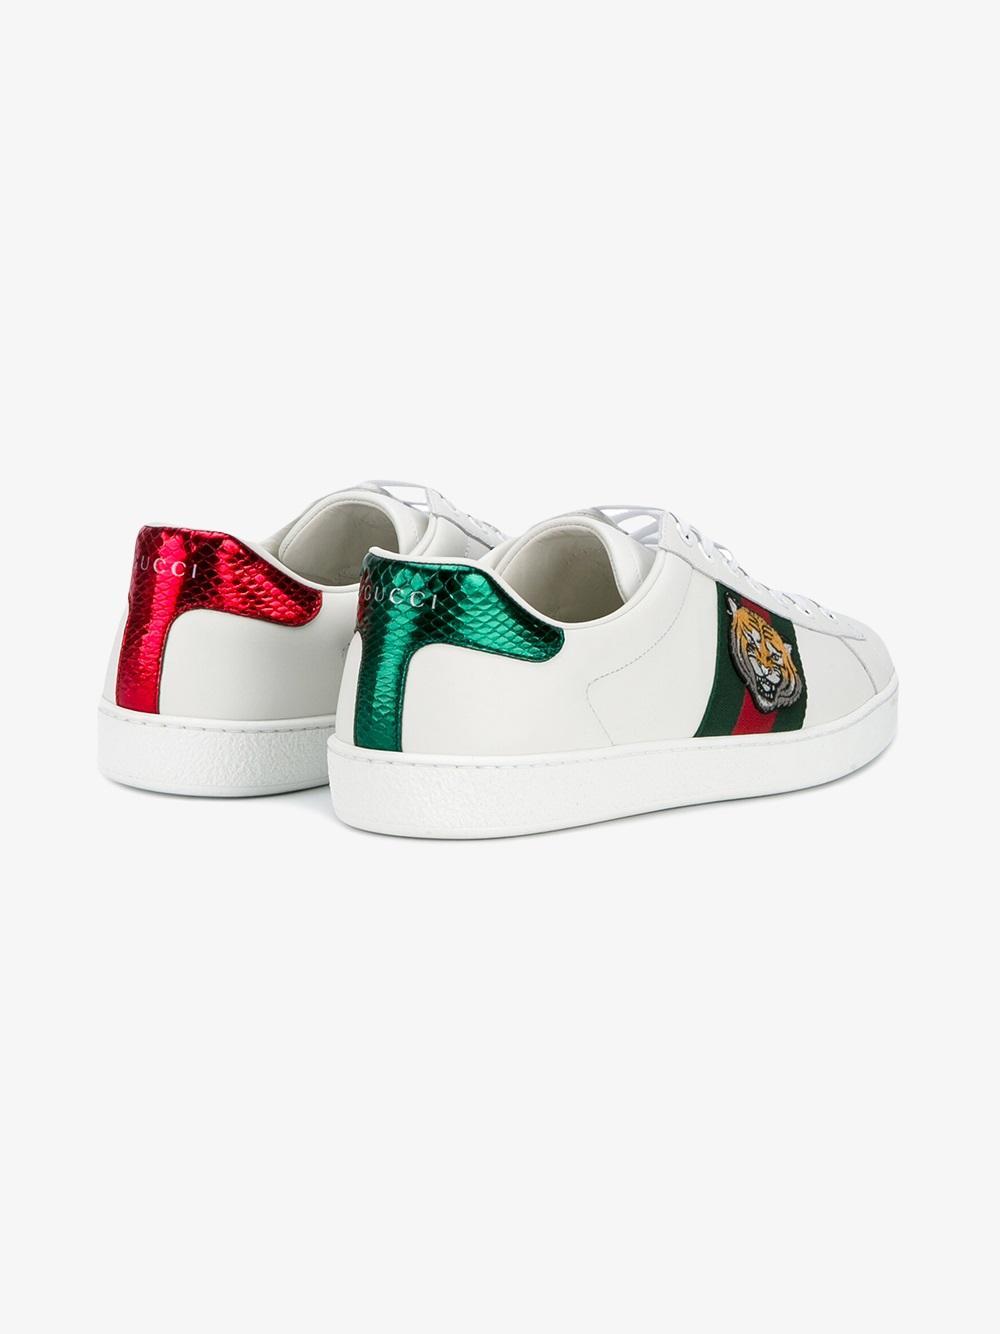 gucci tiger sneakers womens